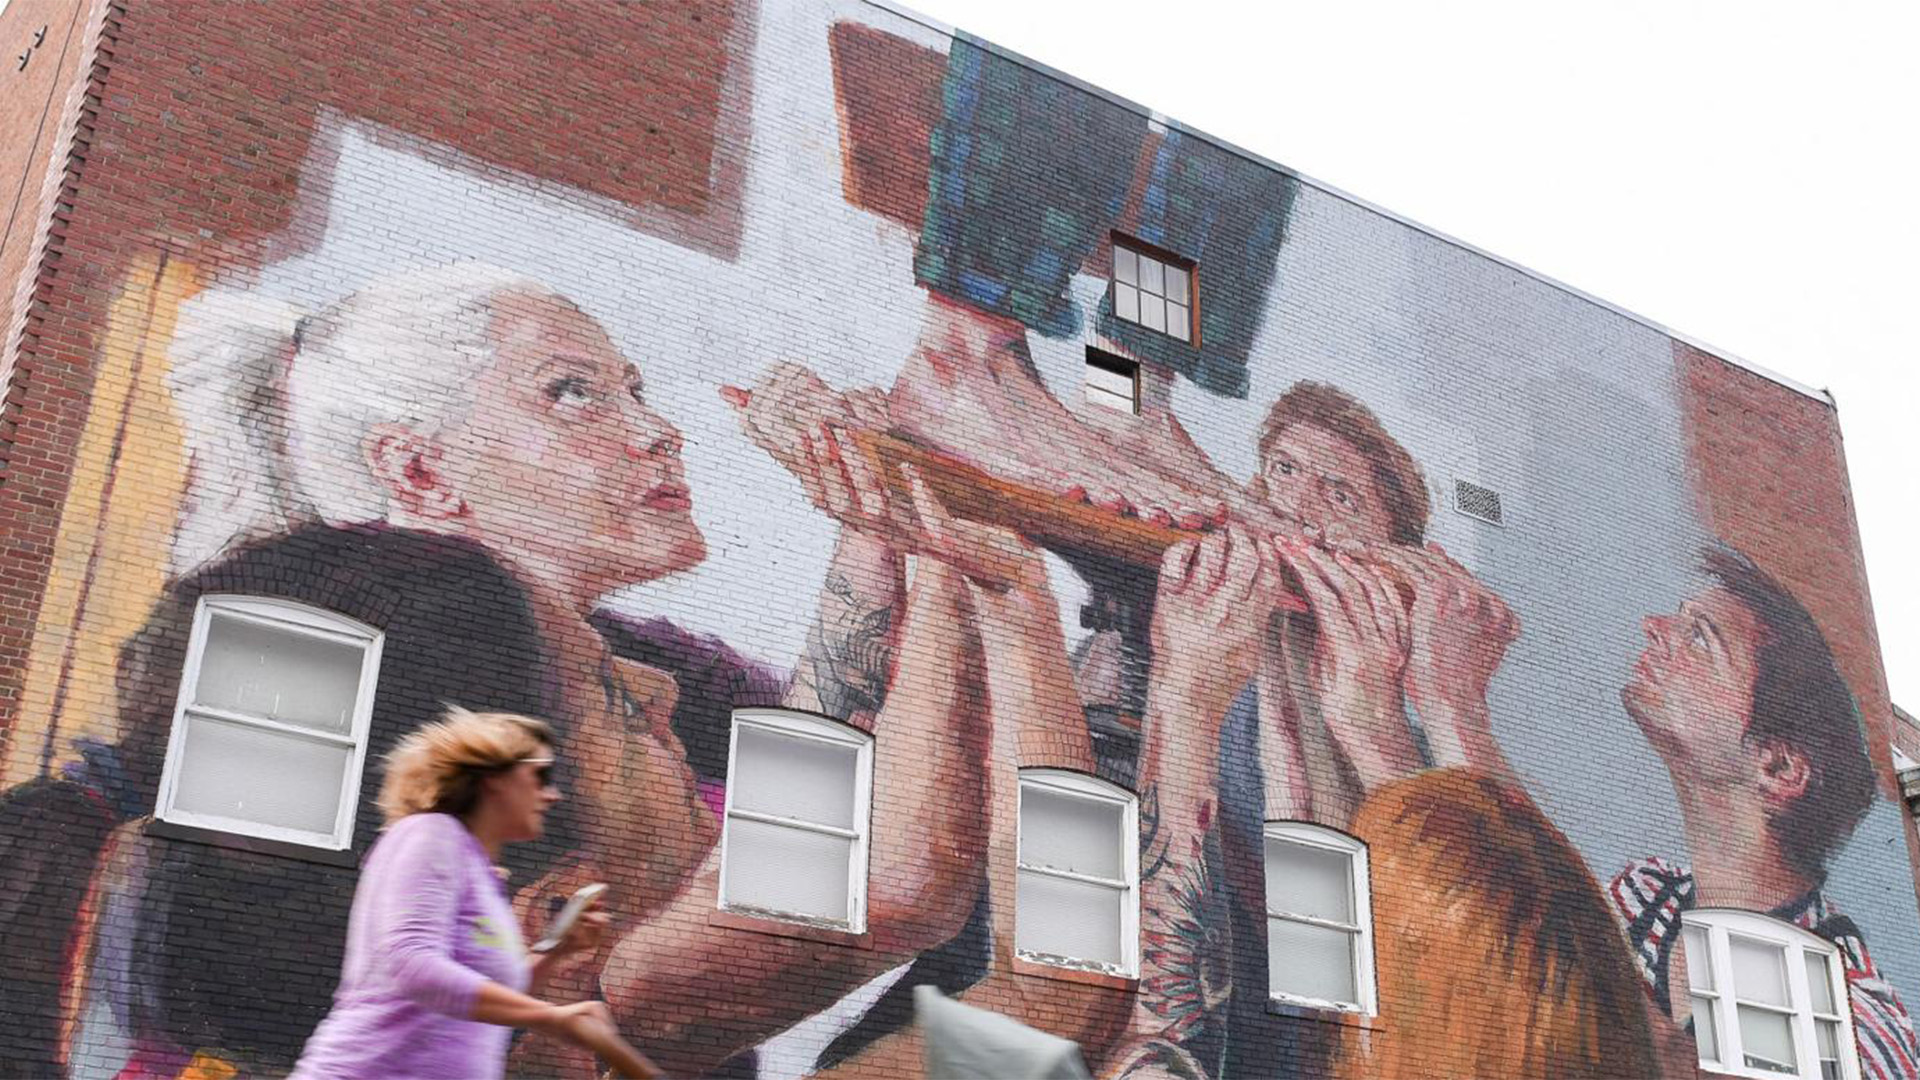 A mural outside of The Cabot featuring a group of people holding another person up.